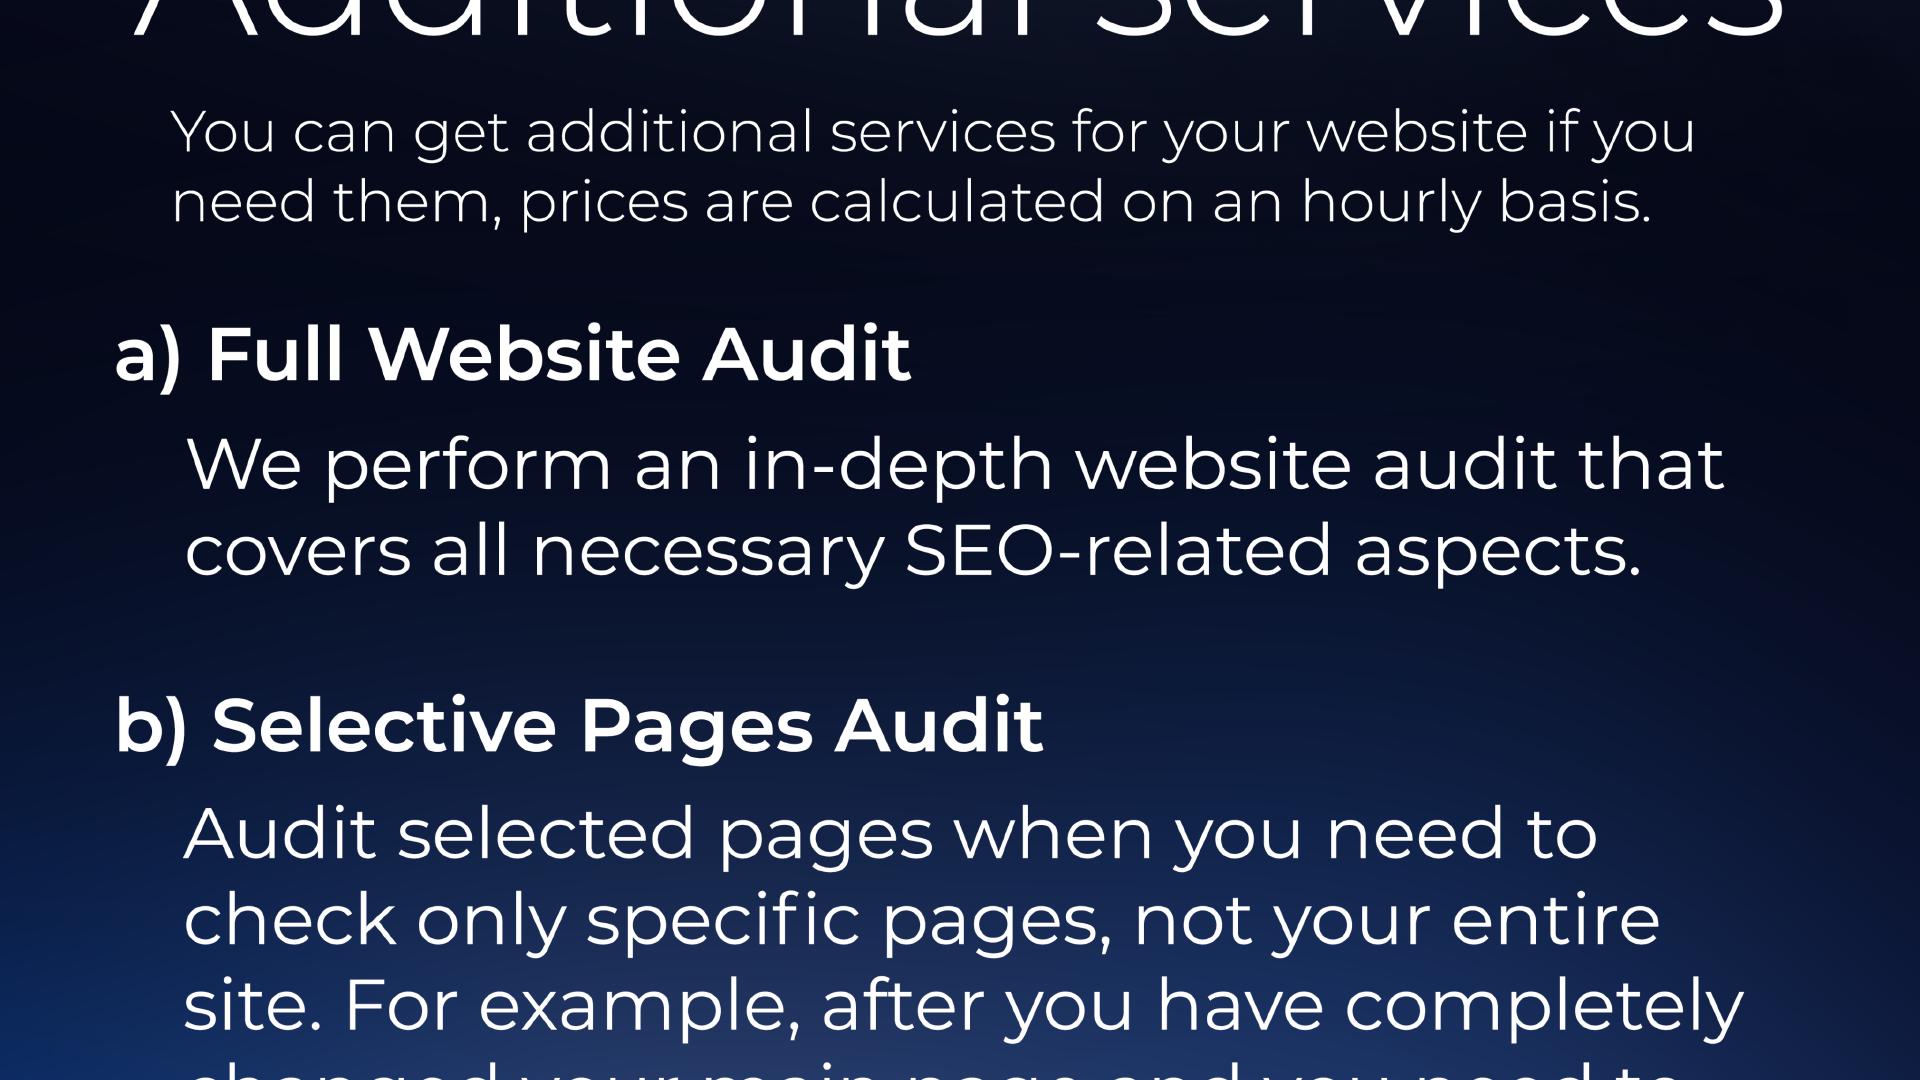 You can get additional services for your website if you need them, prices are calculated on an hourly basis. a) Full Website Audit: We perform an in-depth website audit that covers all necessary SEO-related aspects. b) Selective Pages Audit Audit selected pages when you need to check only specific pages, not your entire site. For example, after you have completely ...